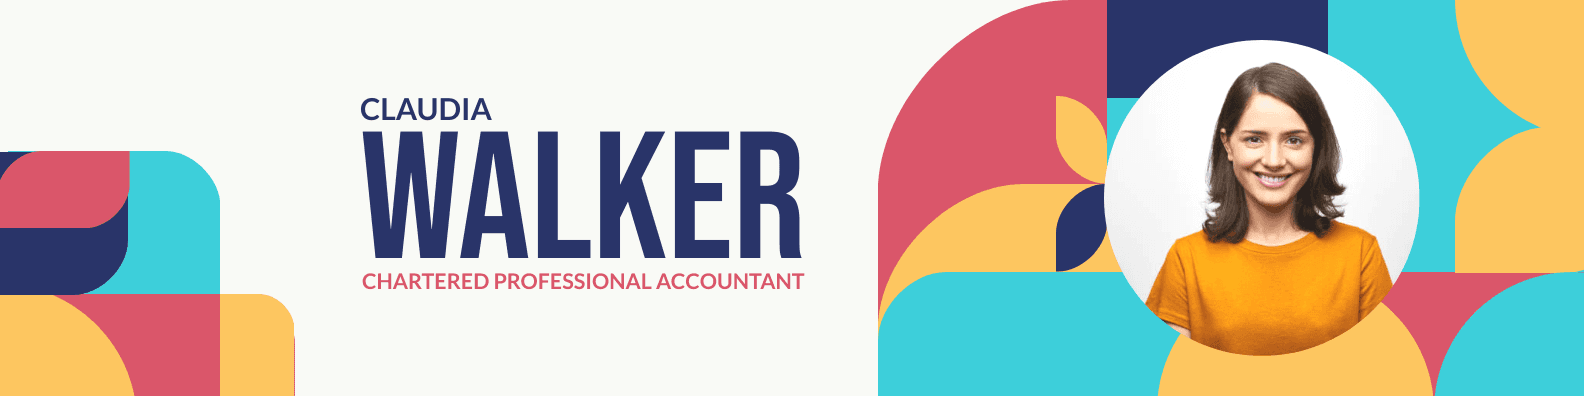 colorful-chartered-professional-accountant-linkedin-banner-template-thumbnail-img